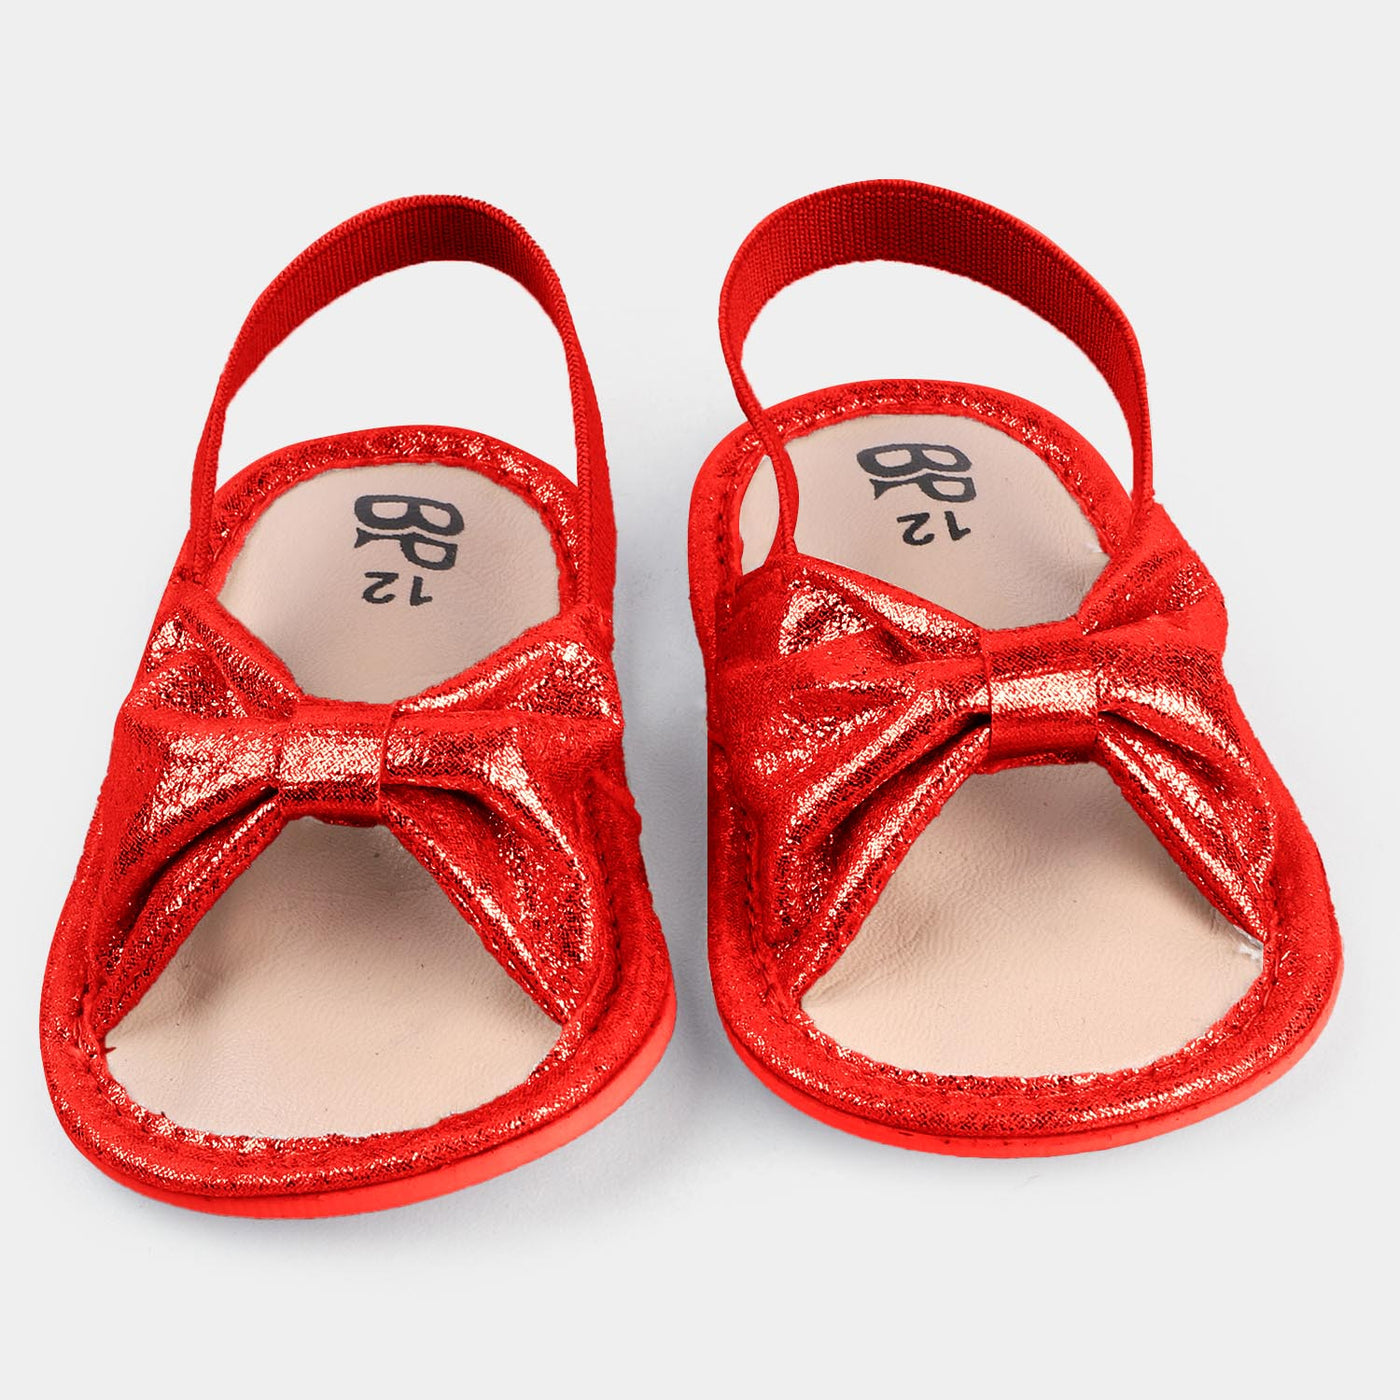 Baby Girls Shoes 1923-Red